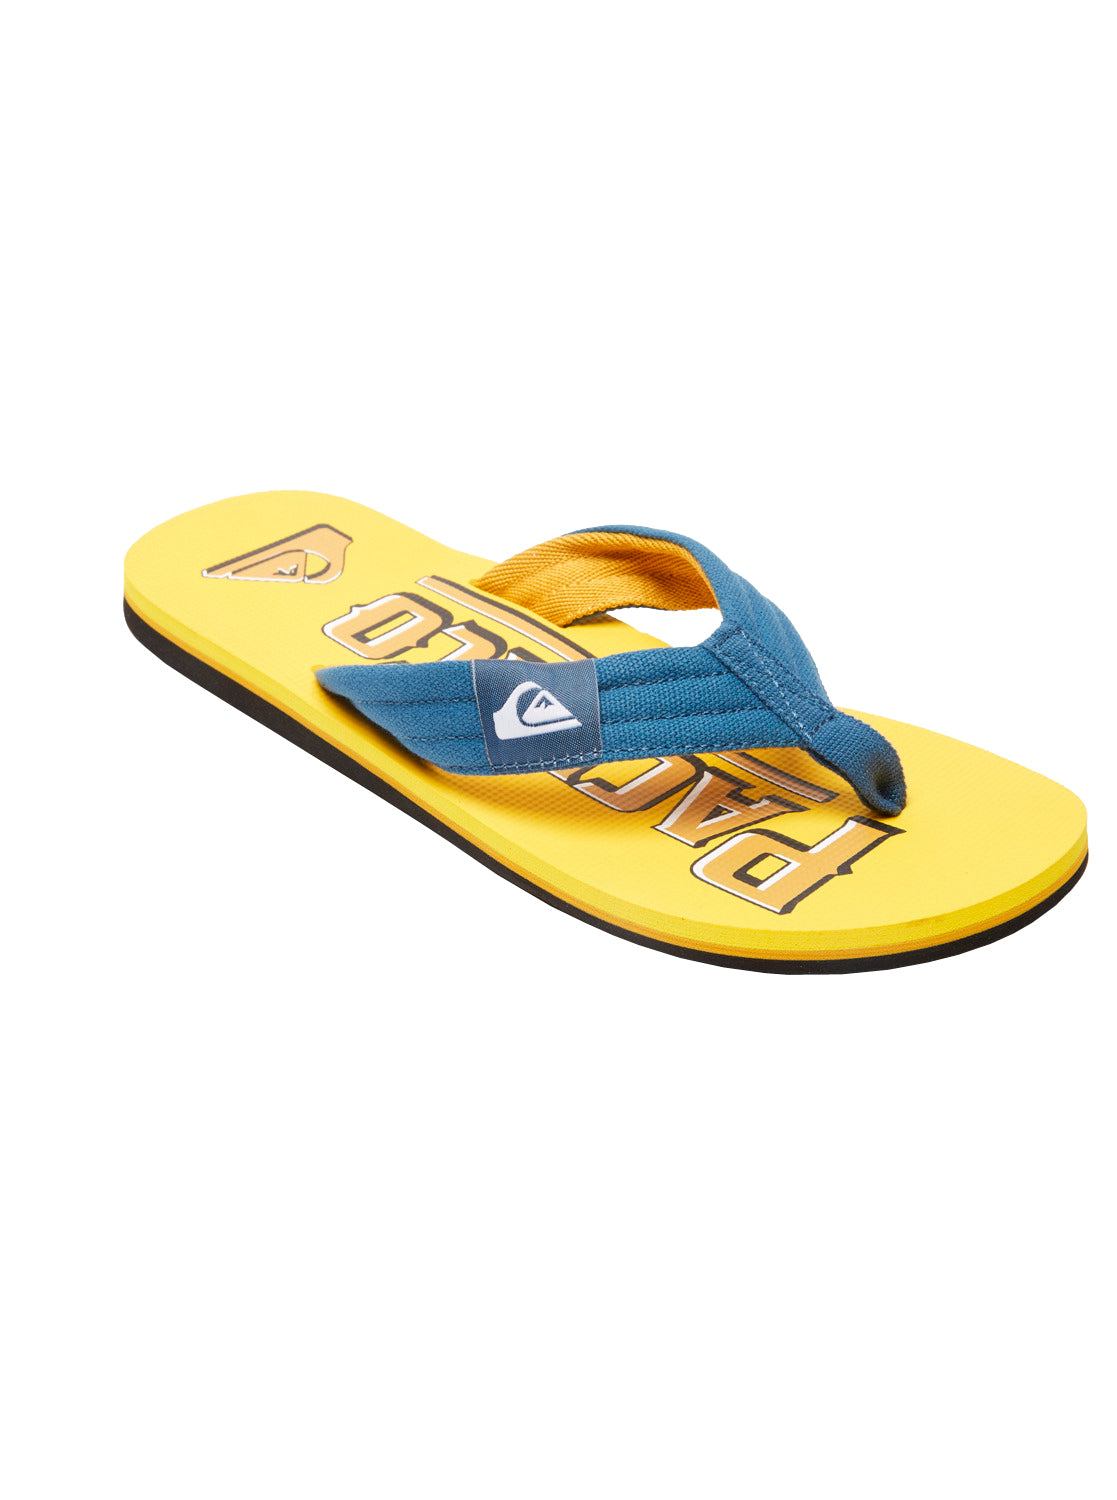 Quiksilver X Pacifico Layback Sandal XKKY 11